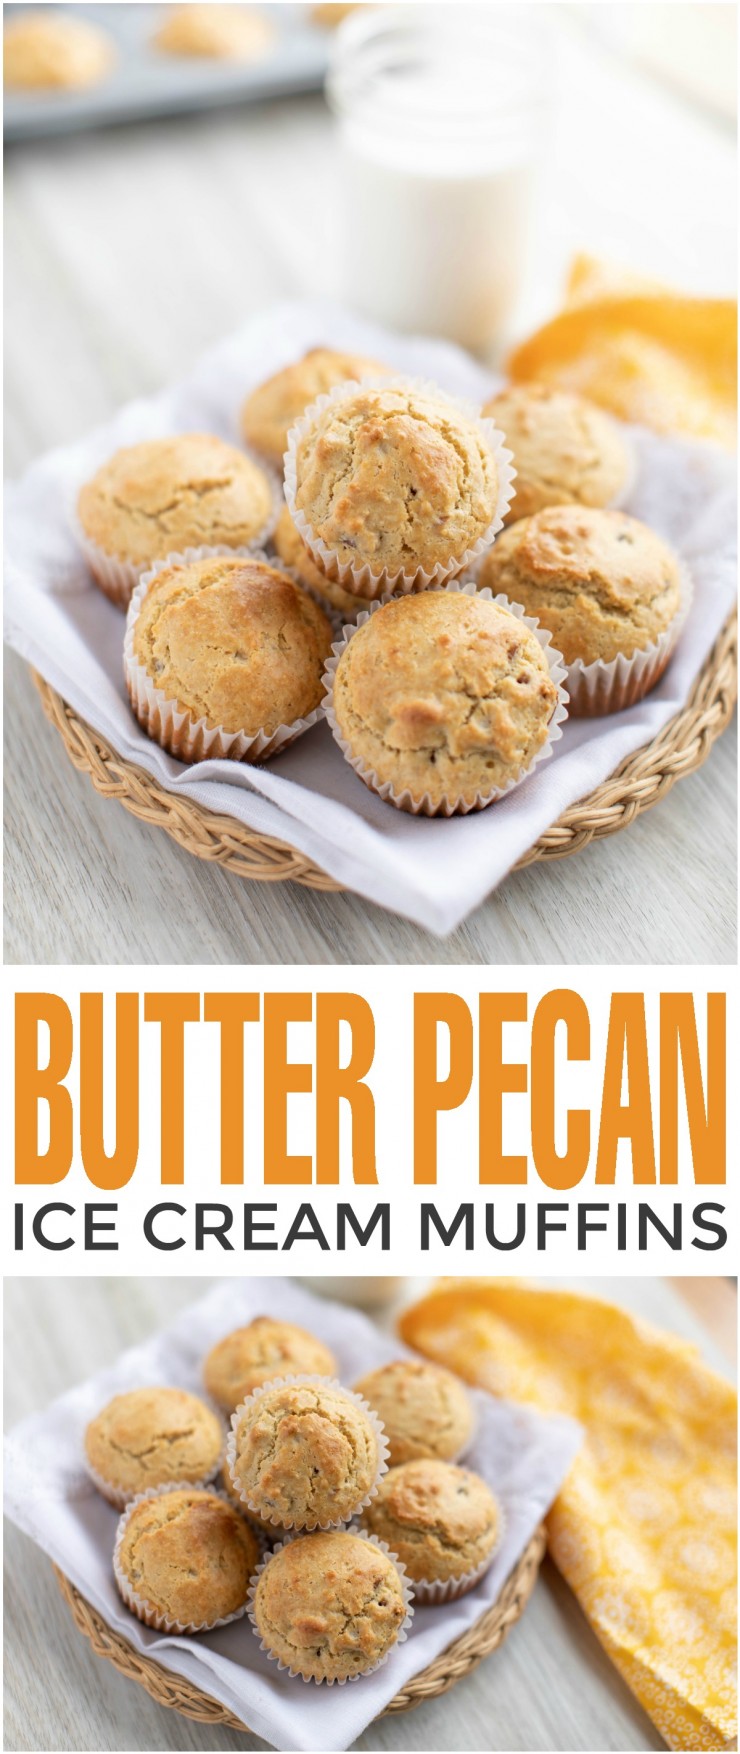 These Butter Pecan Ice Cream Muffins are not only inspired by the classic treat but also feature the actual ice cream as an ingredient! 